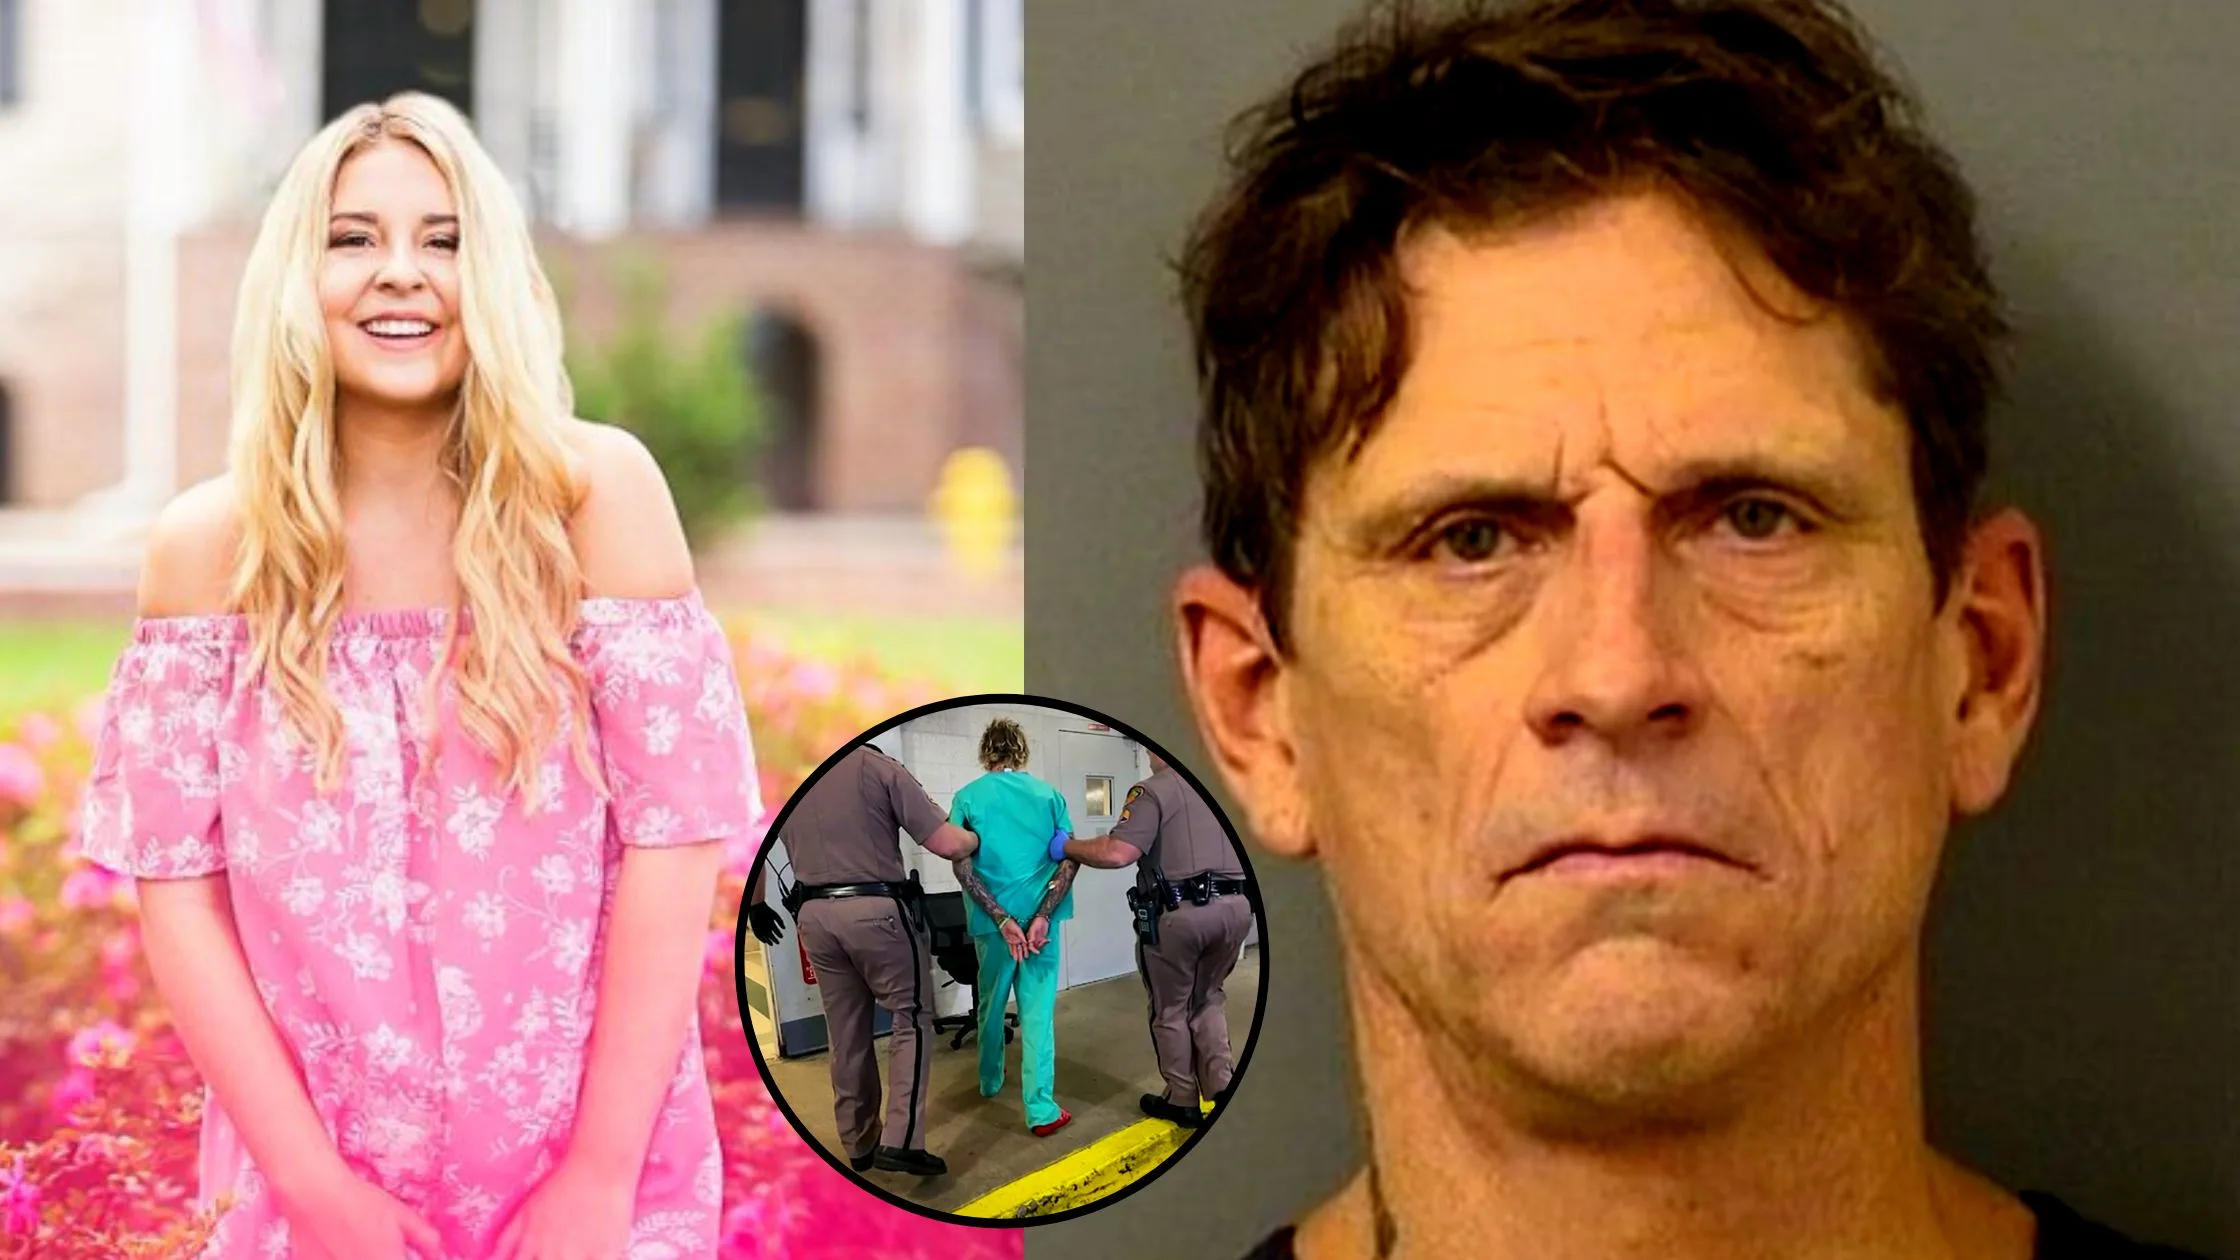 Salt Life Co-Founder Michael Hutto Confesses To killing His Teen Girlfriend Lora Grace Duncan